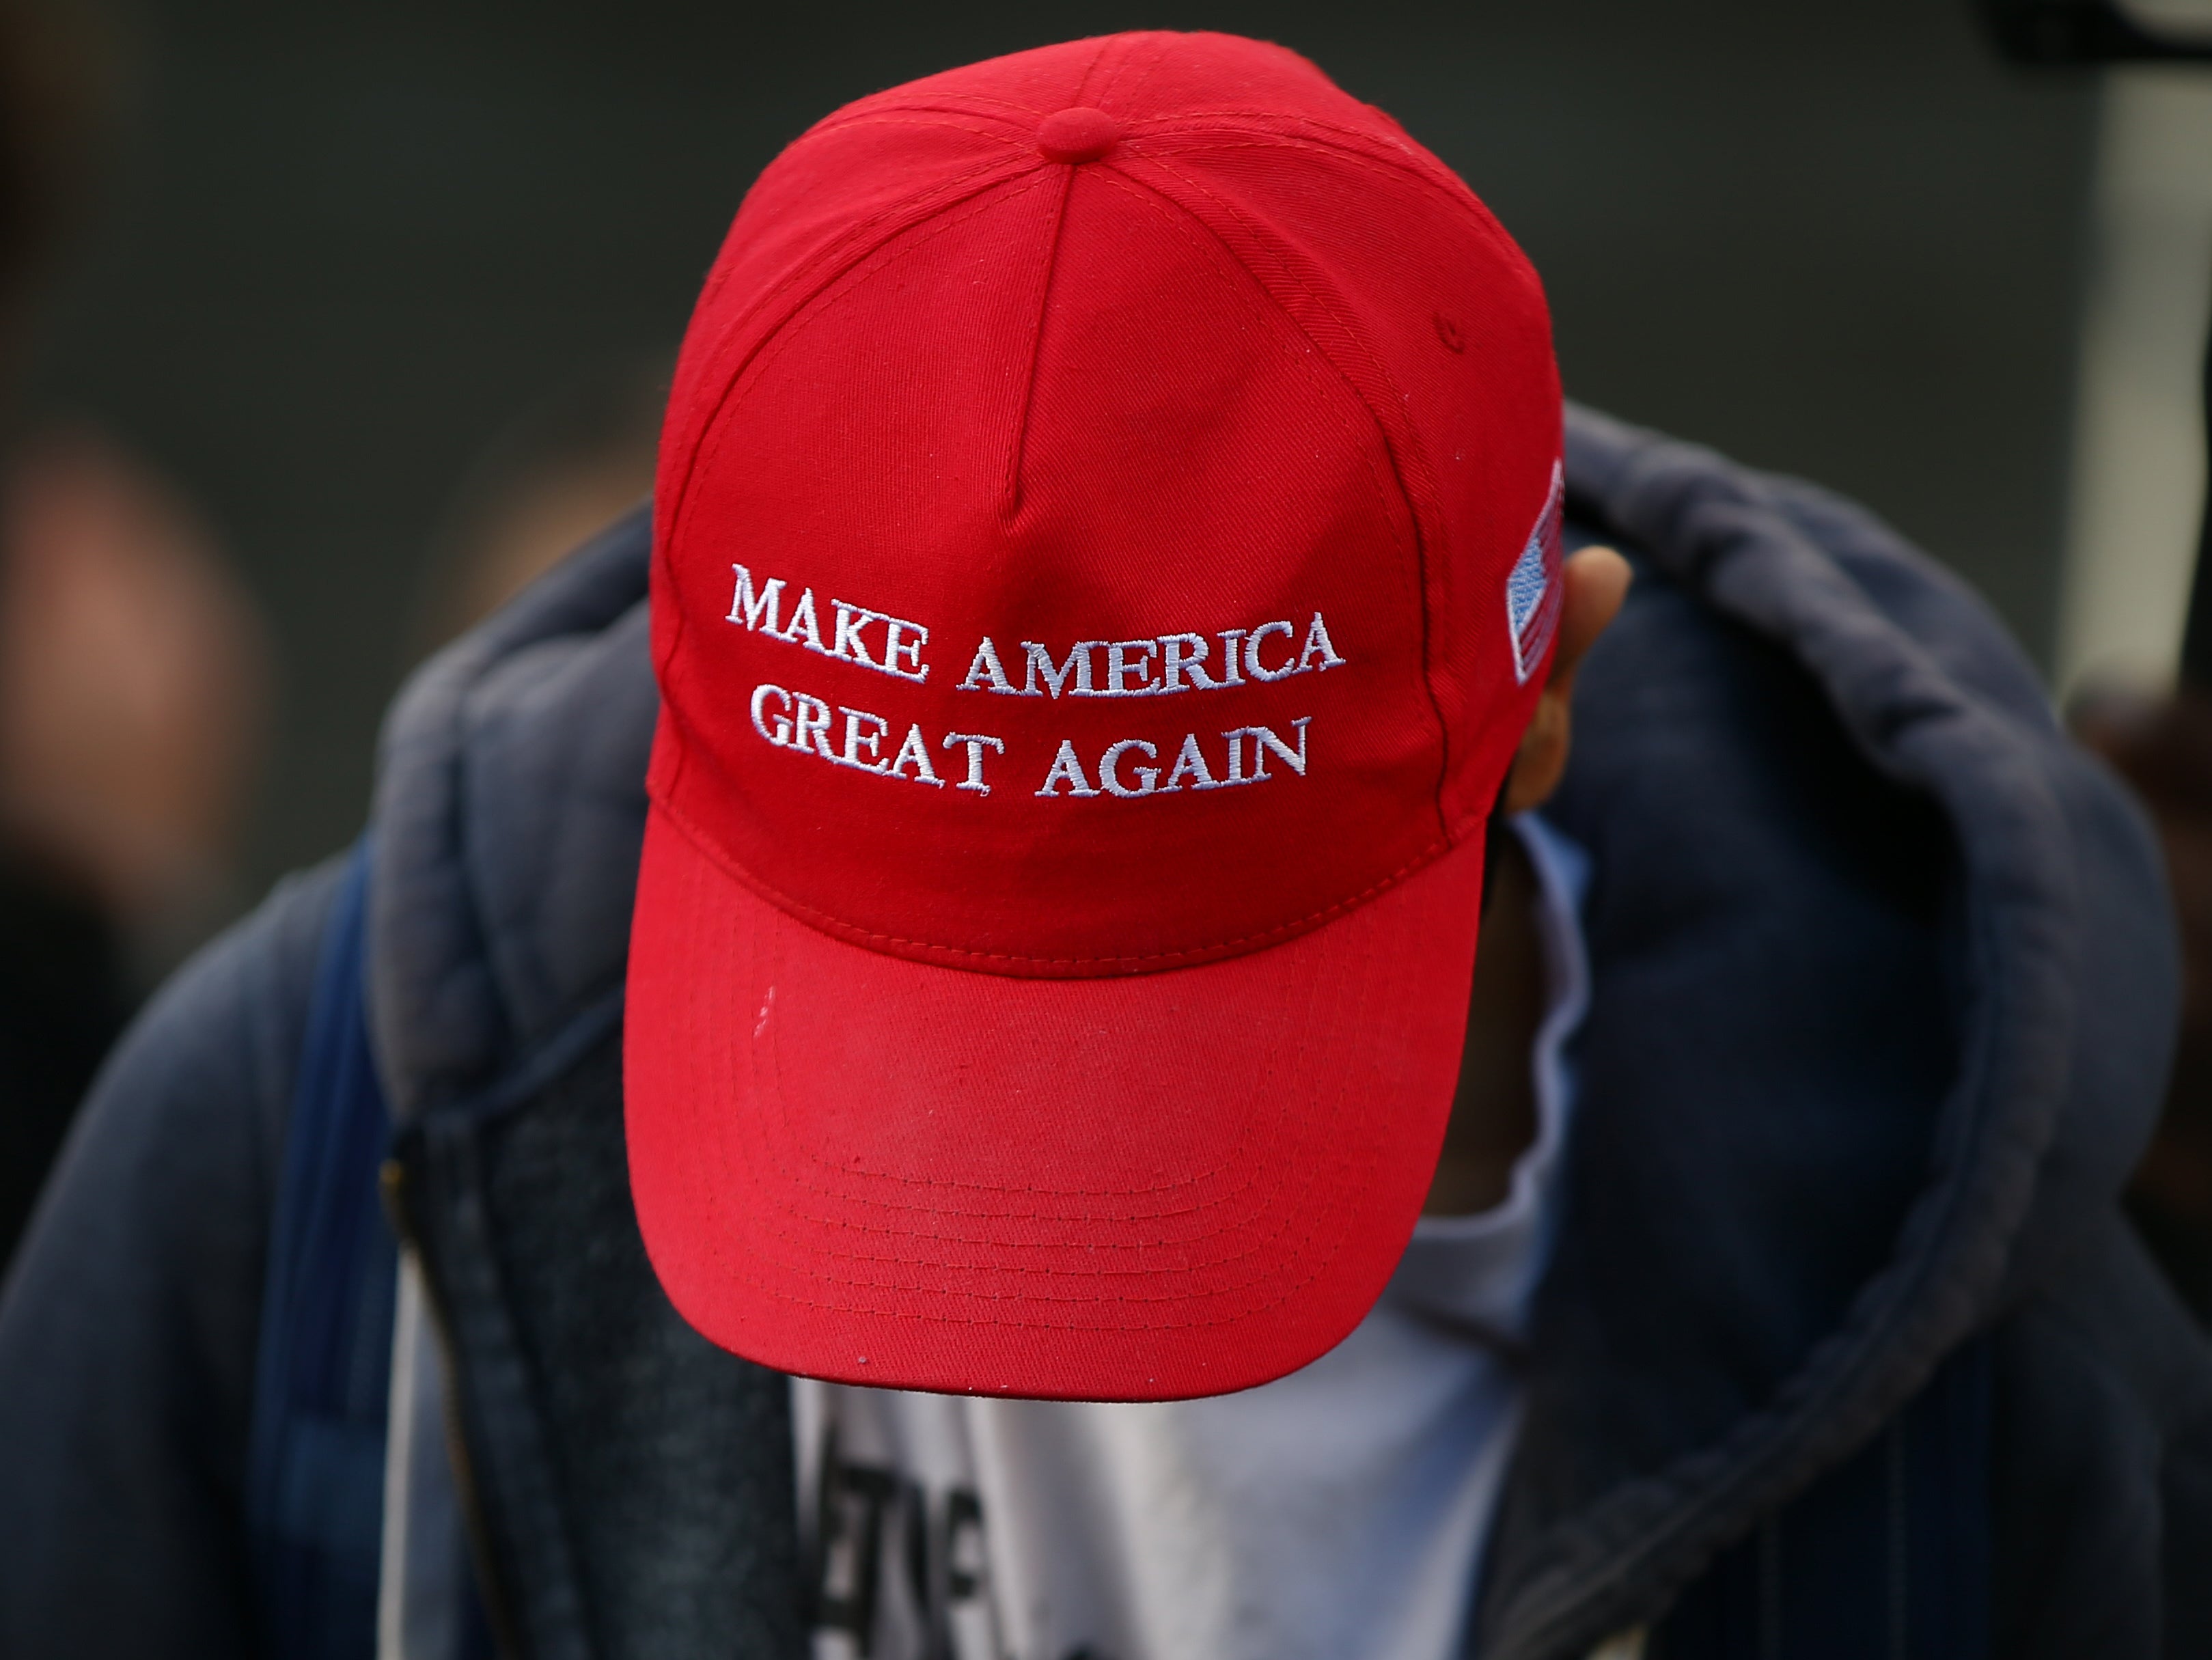 The bright red hats were created by Donald Trump for his presidential run (File photo)